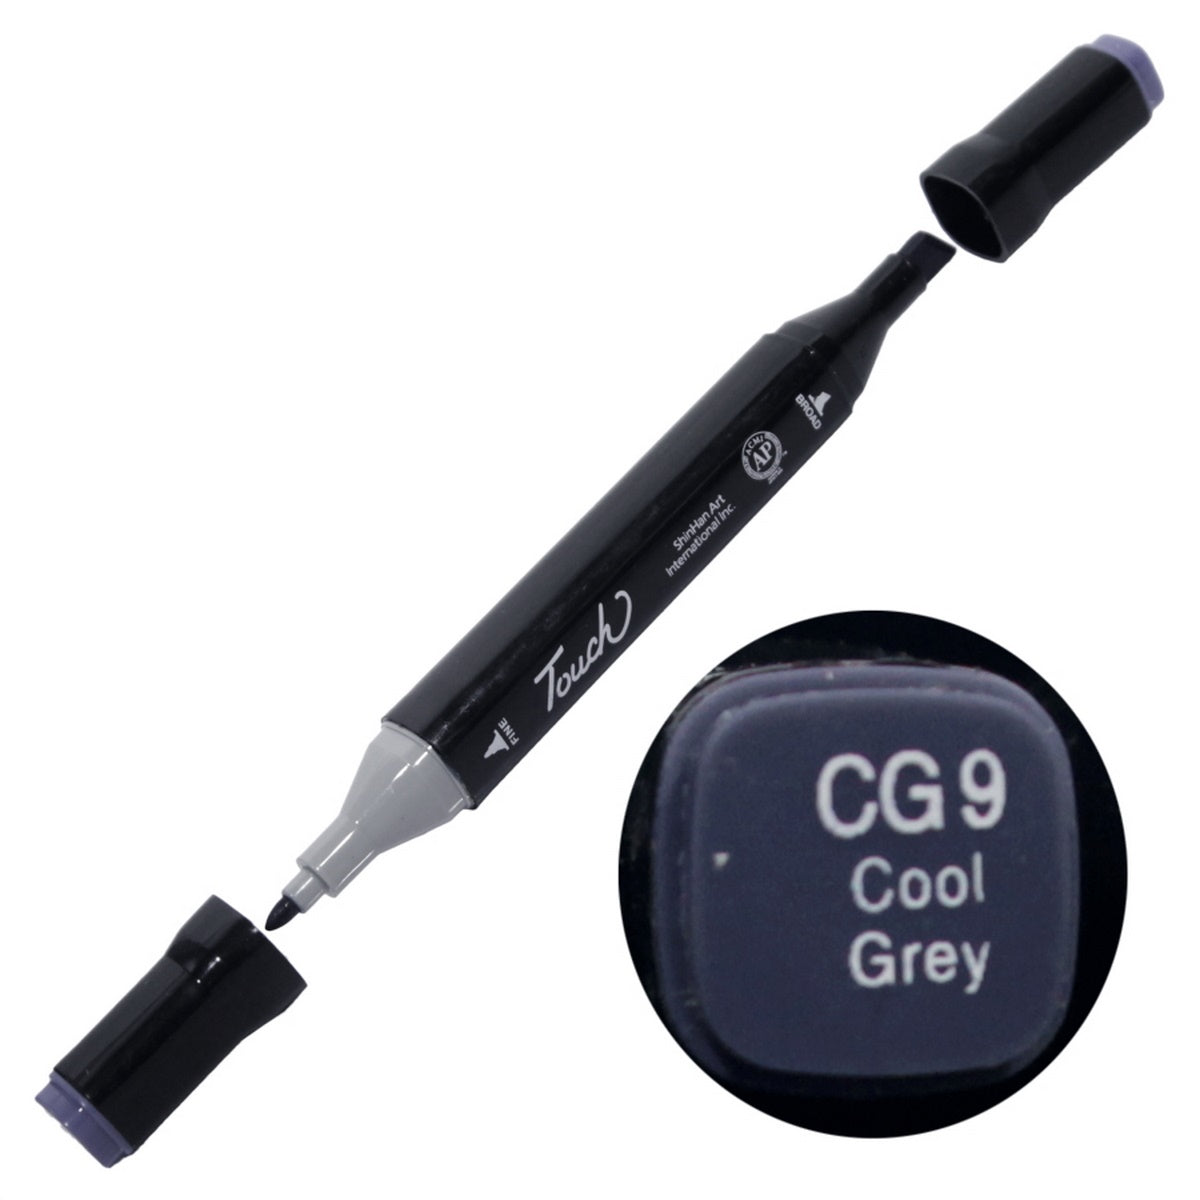 jags-mumbai Marker Touch Marker 2in1 Pen CG9 Cool Grey